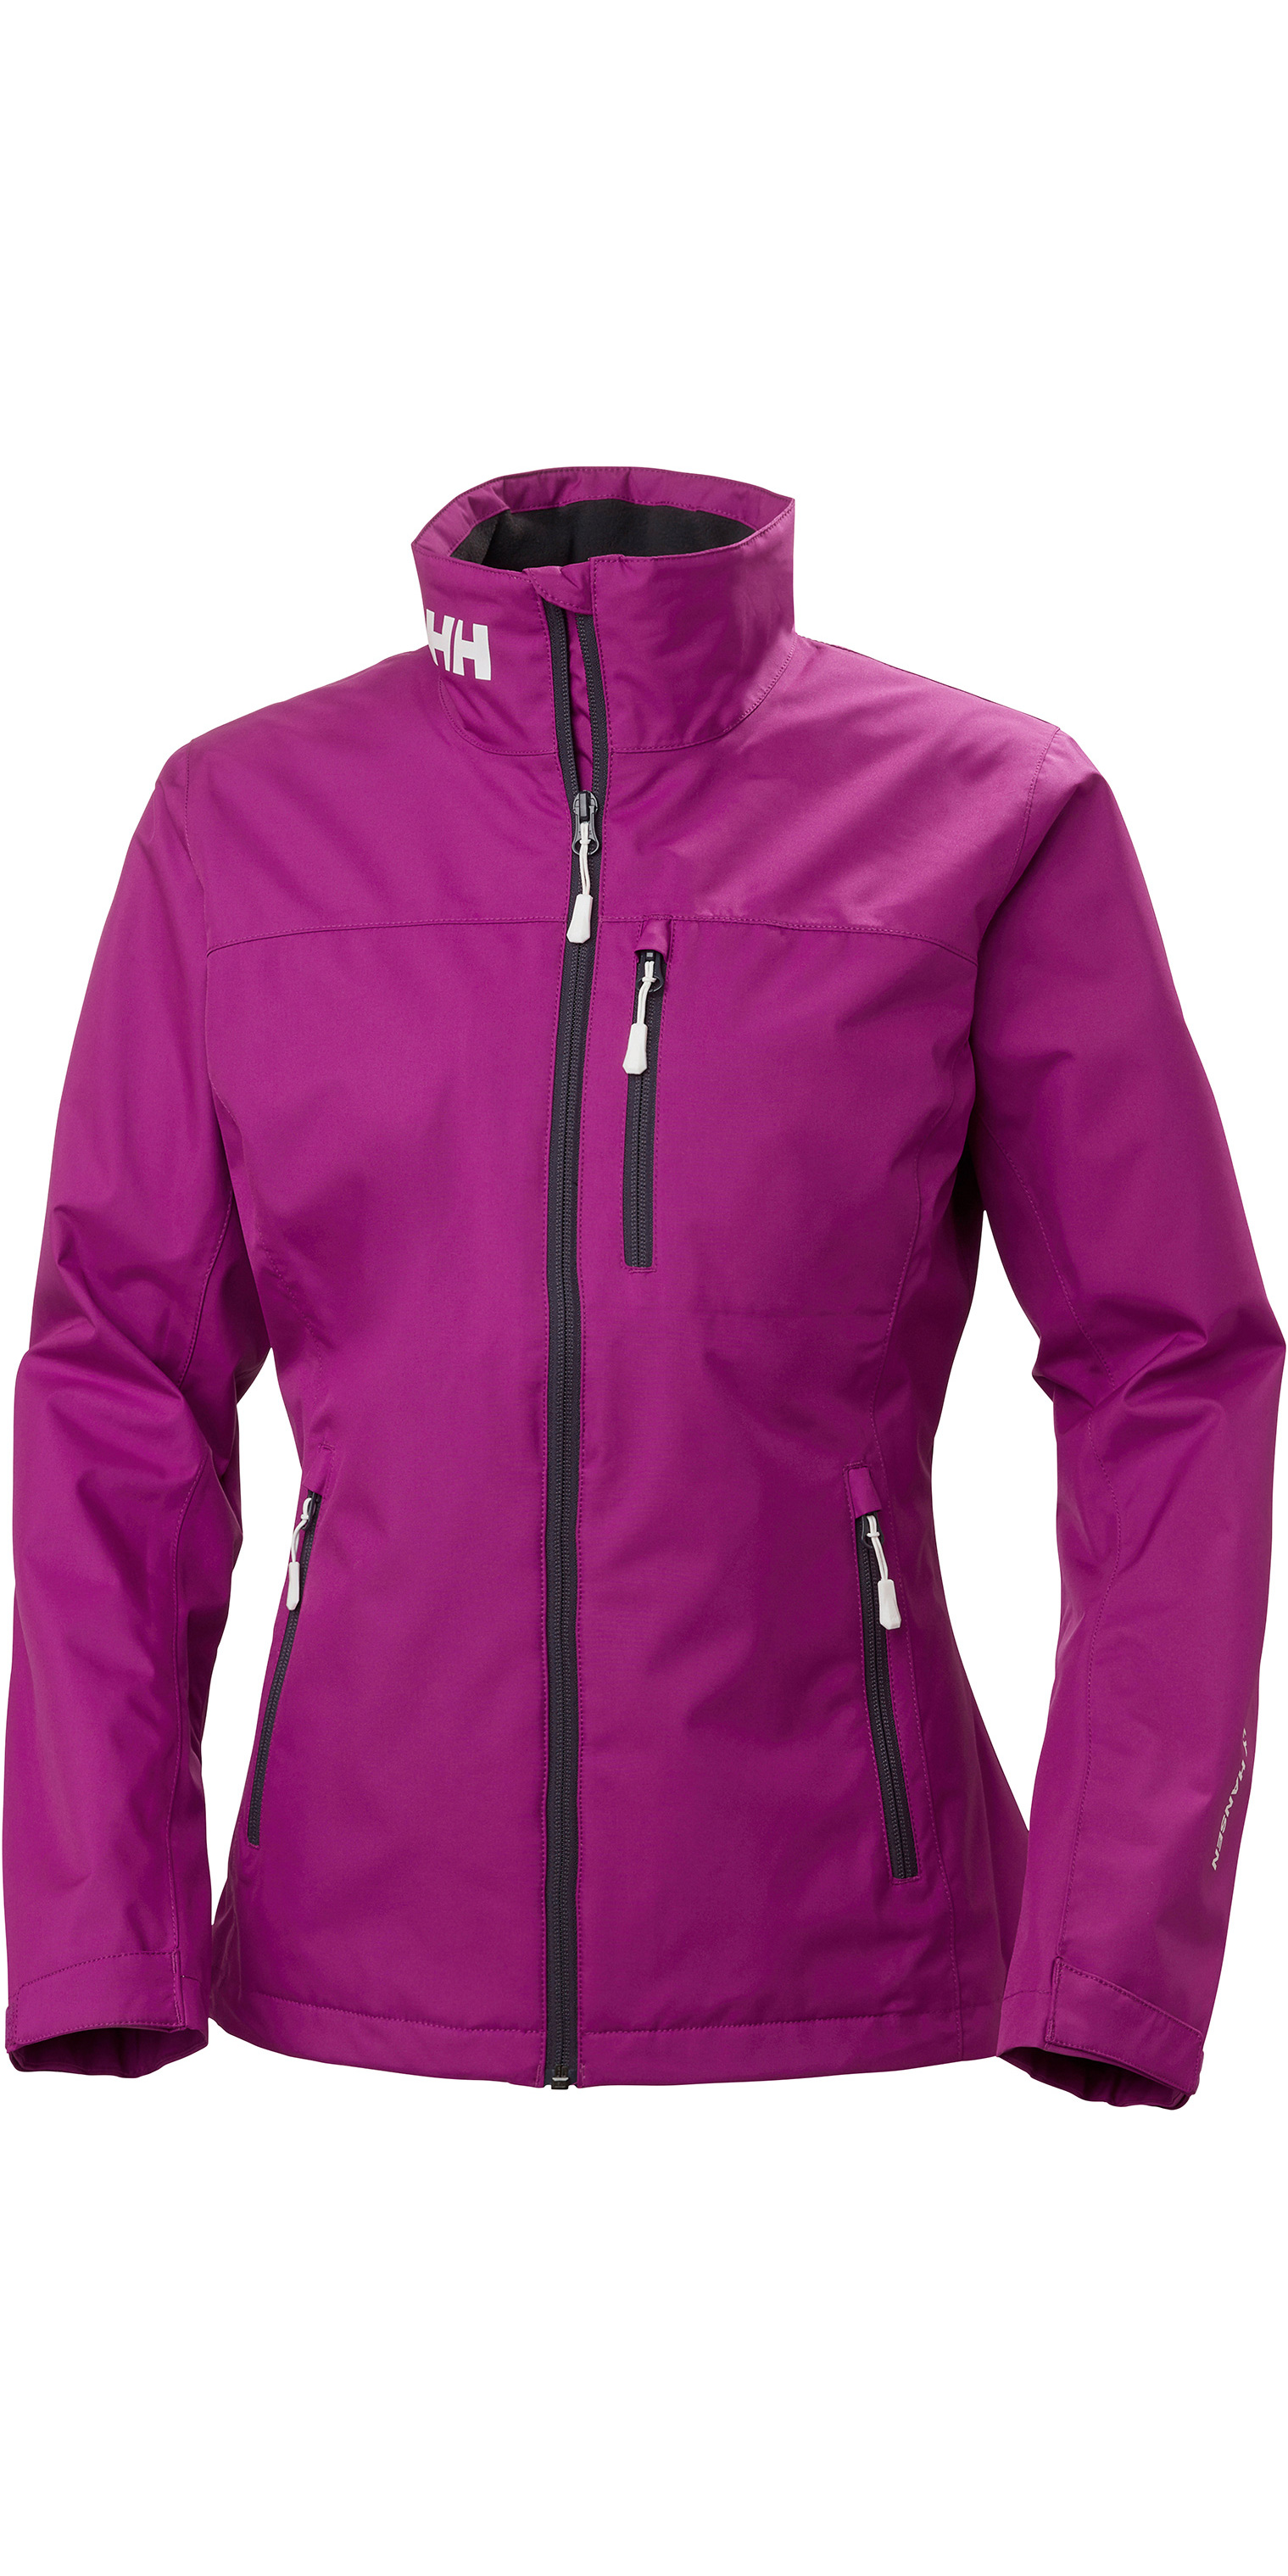 2019 Helly Hansen Womens Mid Layer Crew Jacket Berry 30317 - Sailing ...